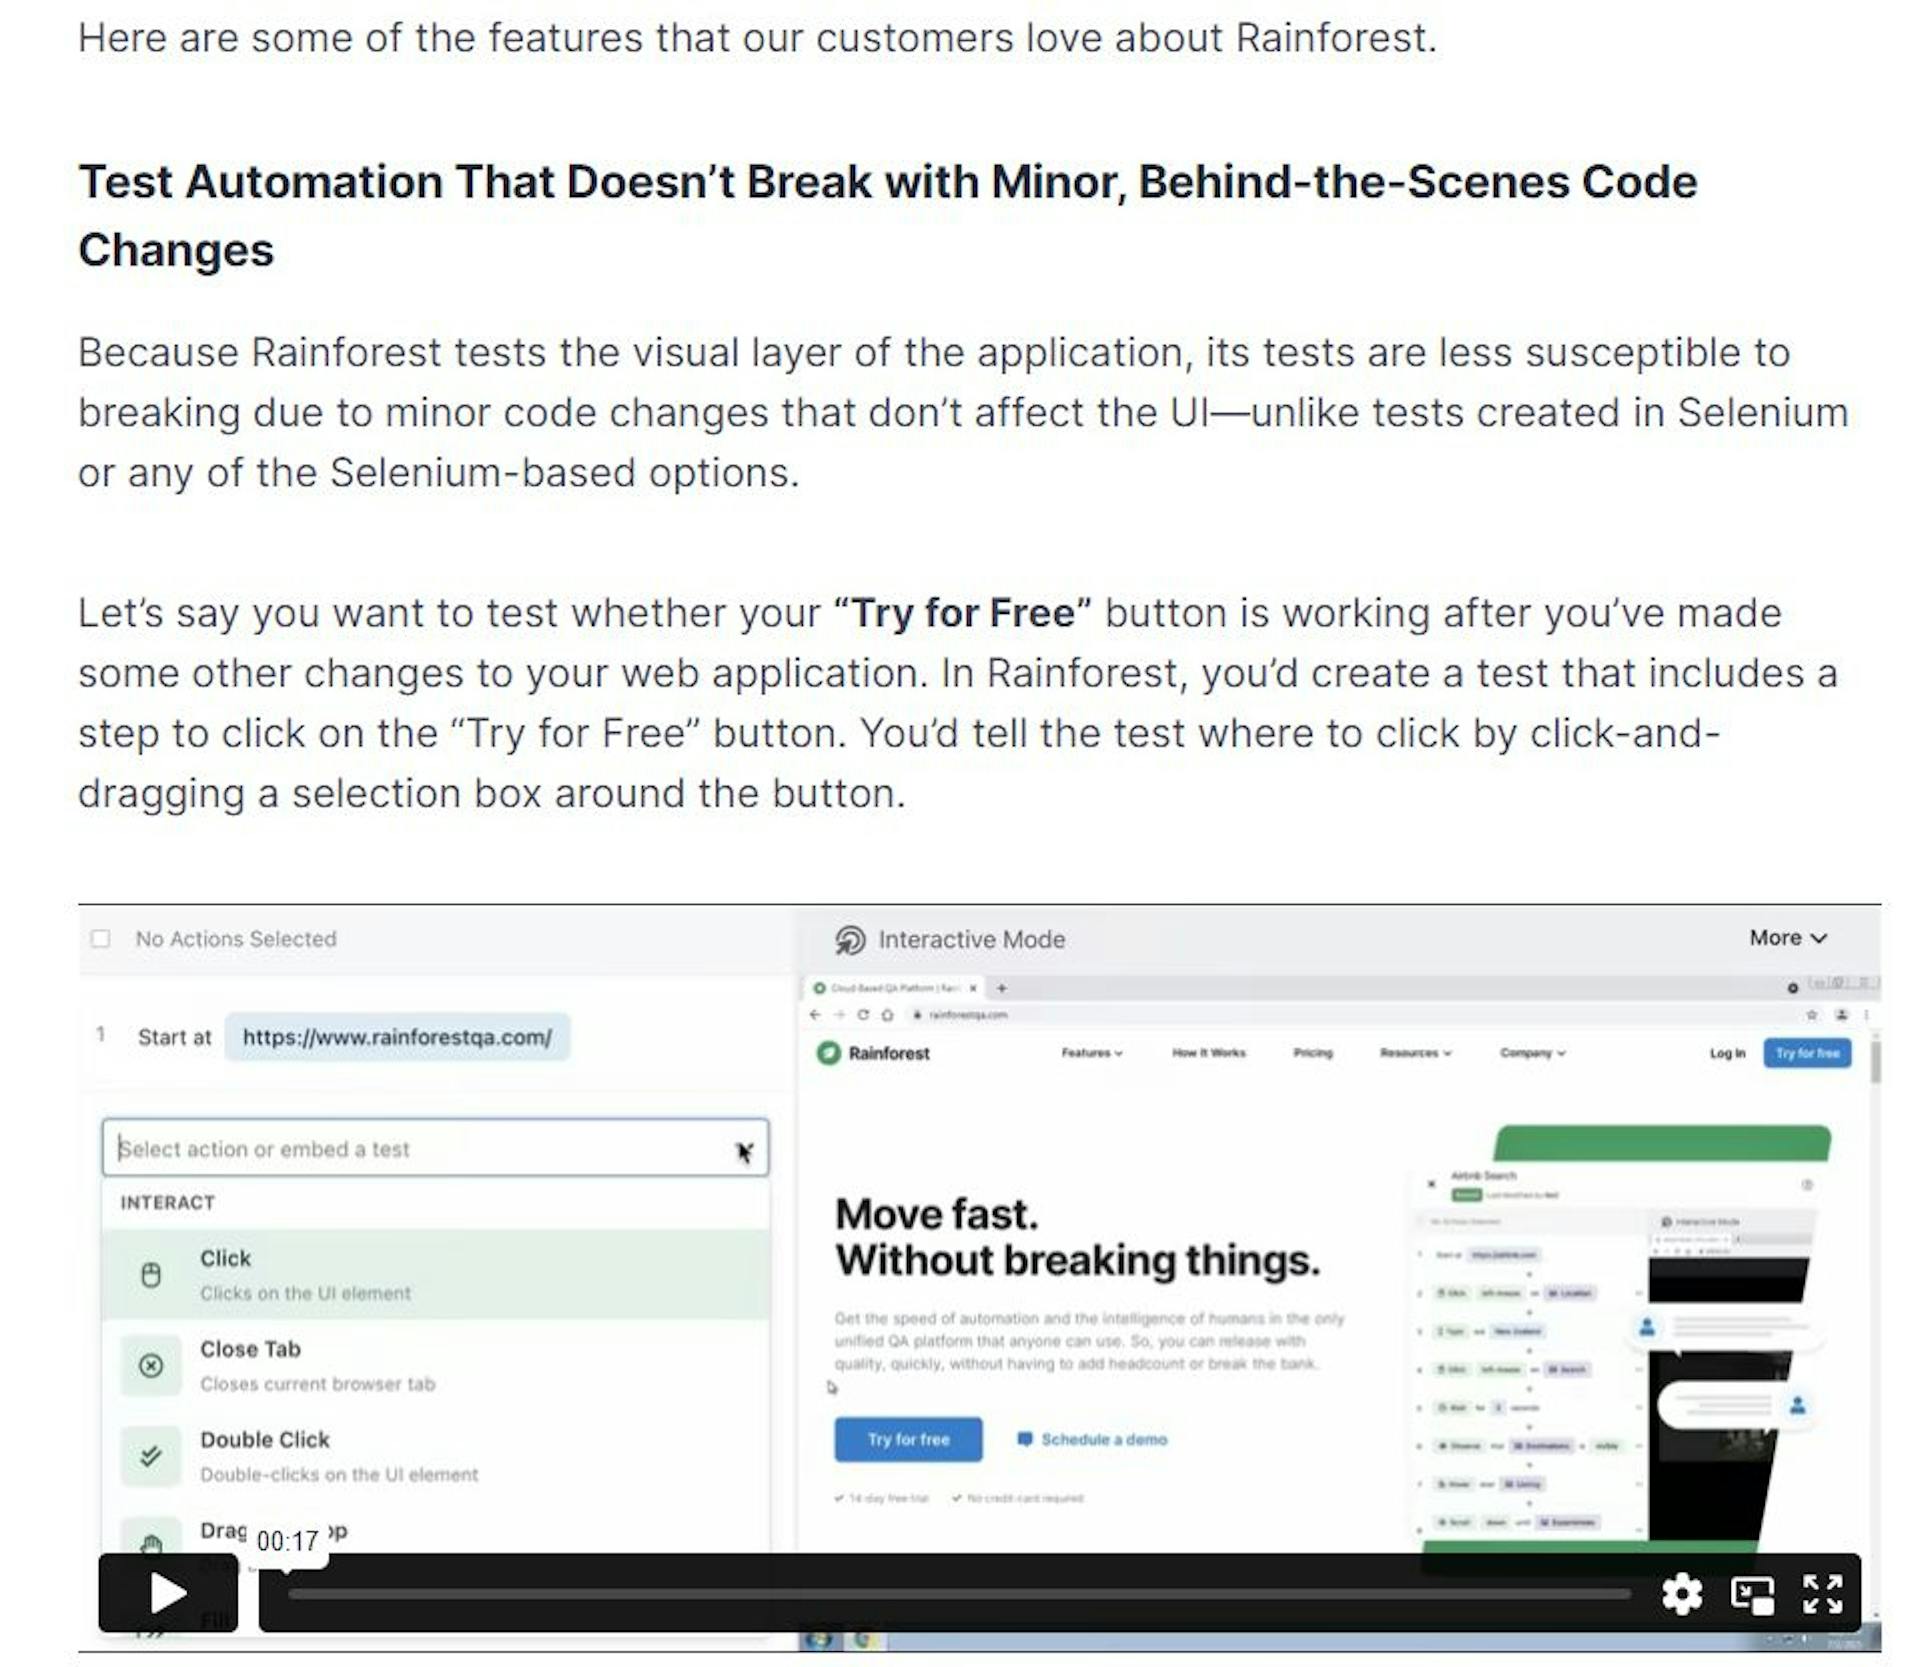 Image showing a screenshot from Rainforest's demo of how their no-code tool helps companies check their code without the expertise of many developers.